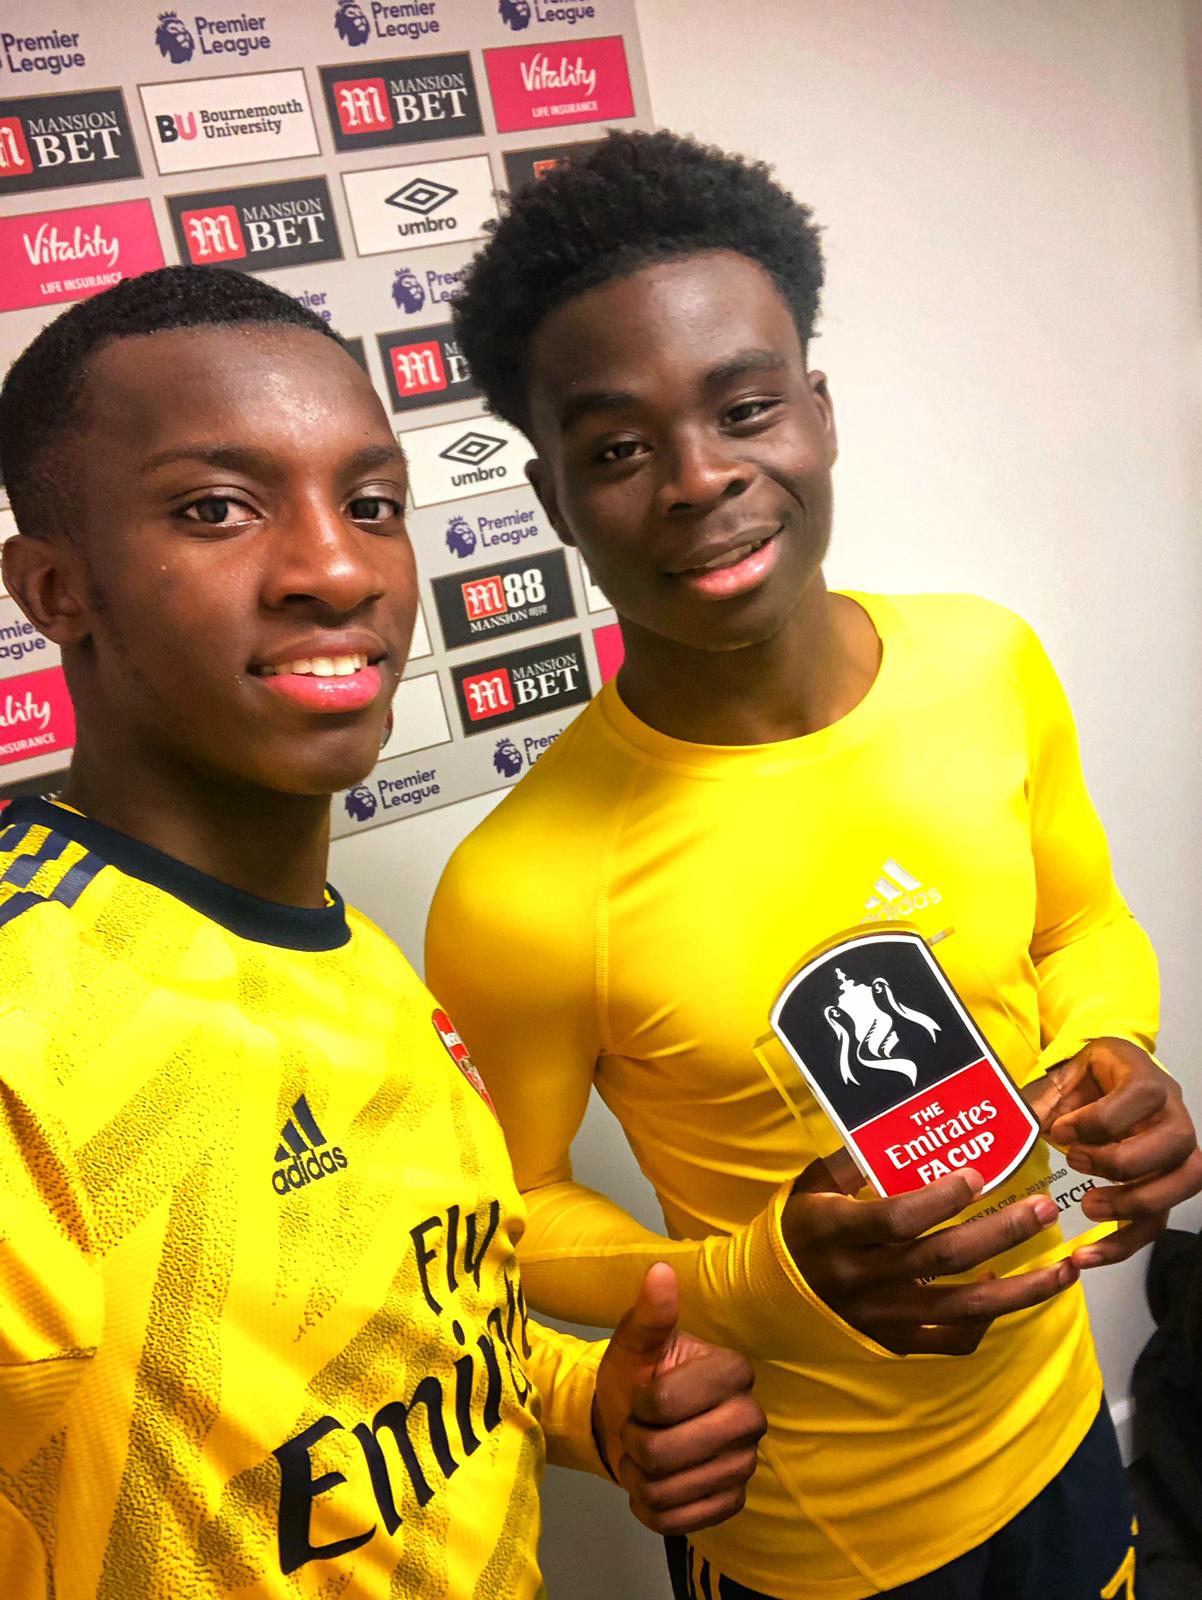 Arsenal Youngster Bukayo Saka Awarded The Man Of The Match After A Stellar Performance During The Fa Match V Afc Bournemouth Futballnews Com